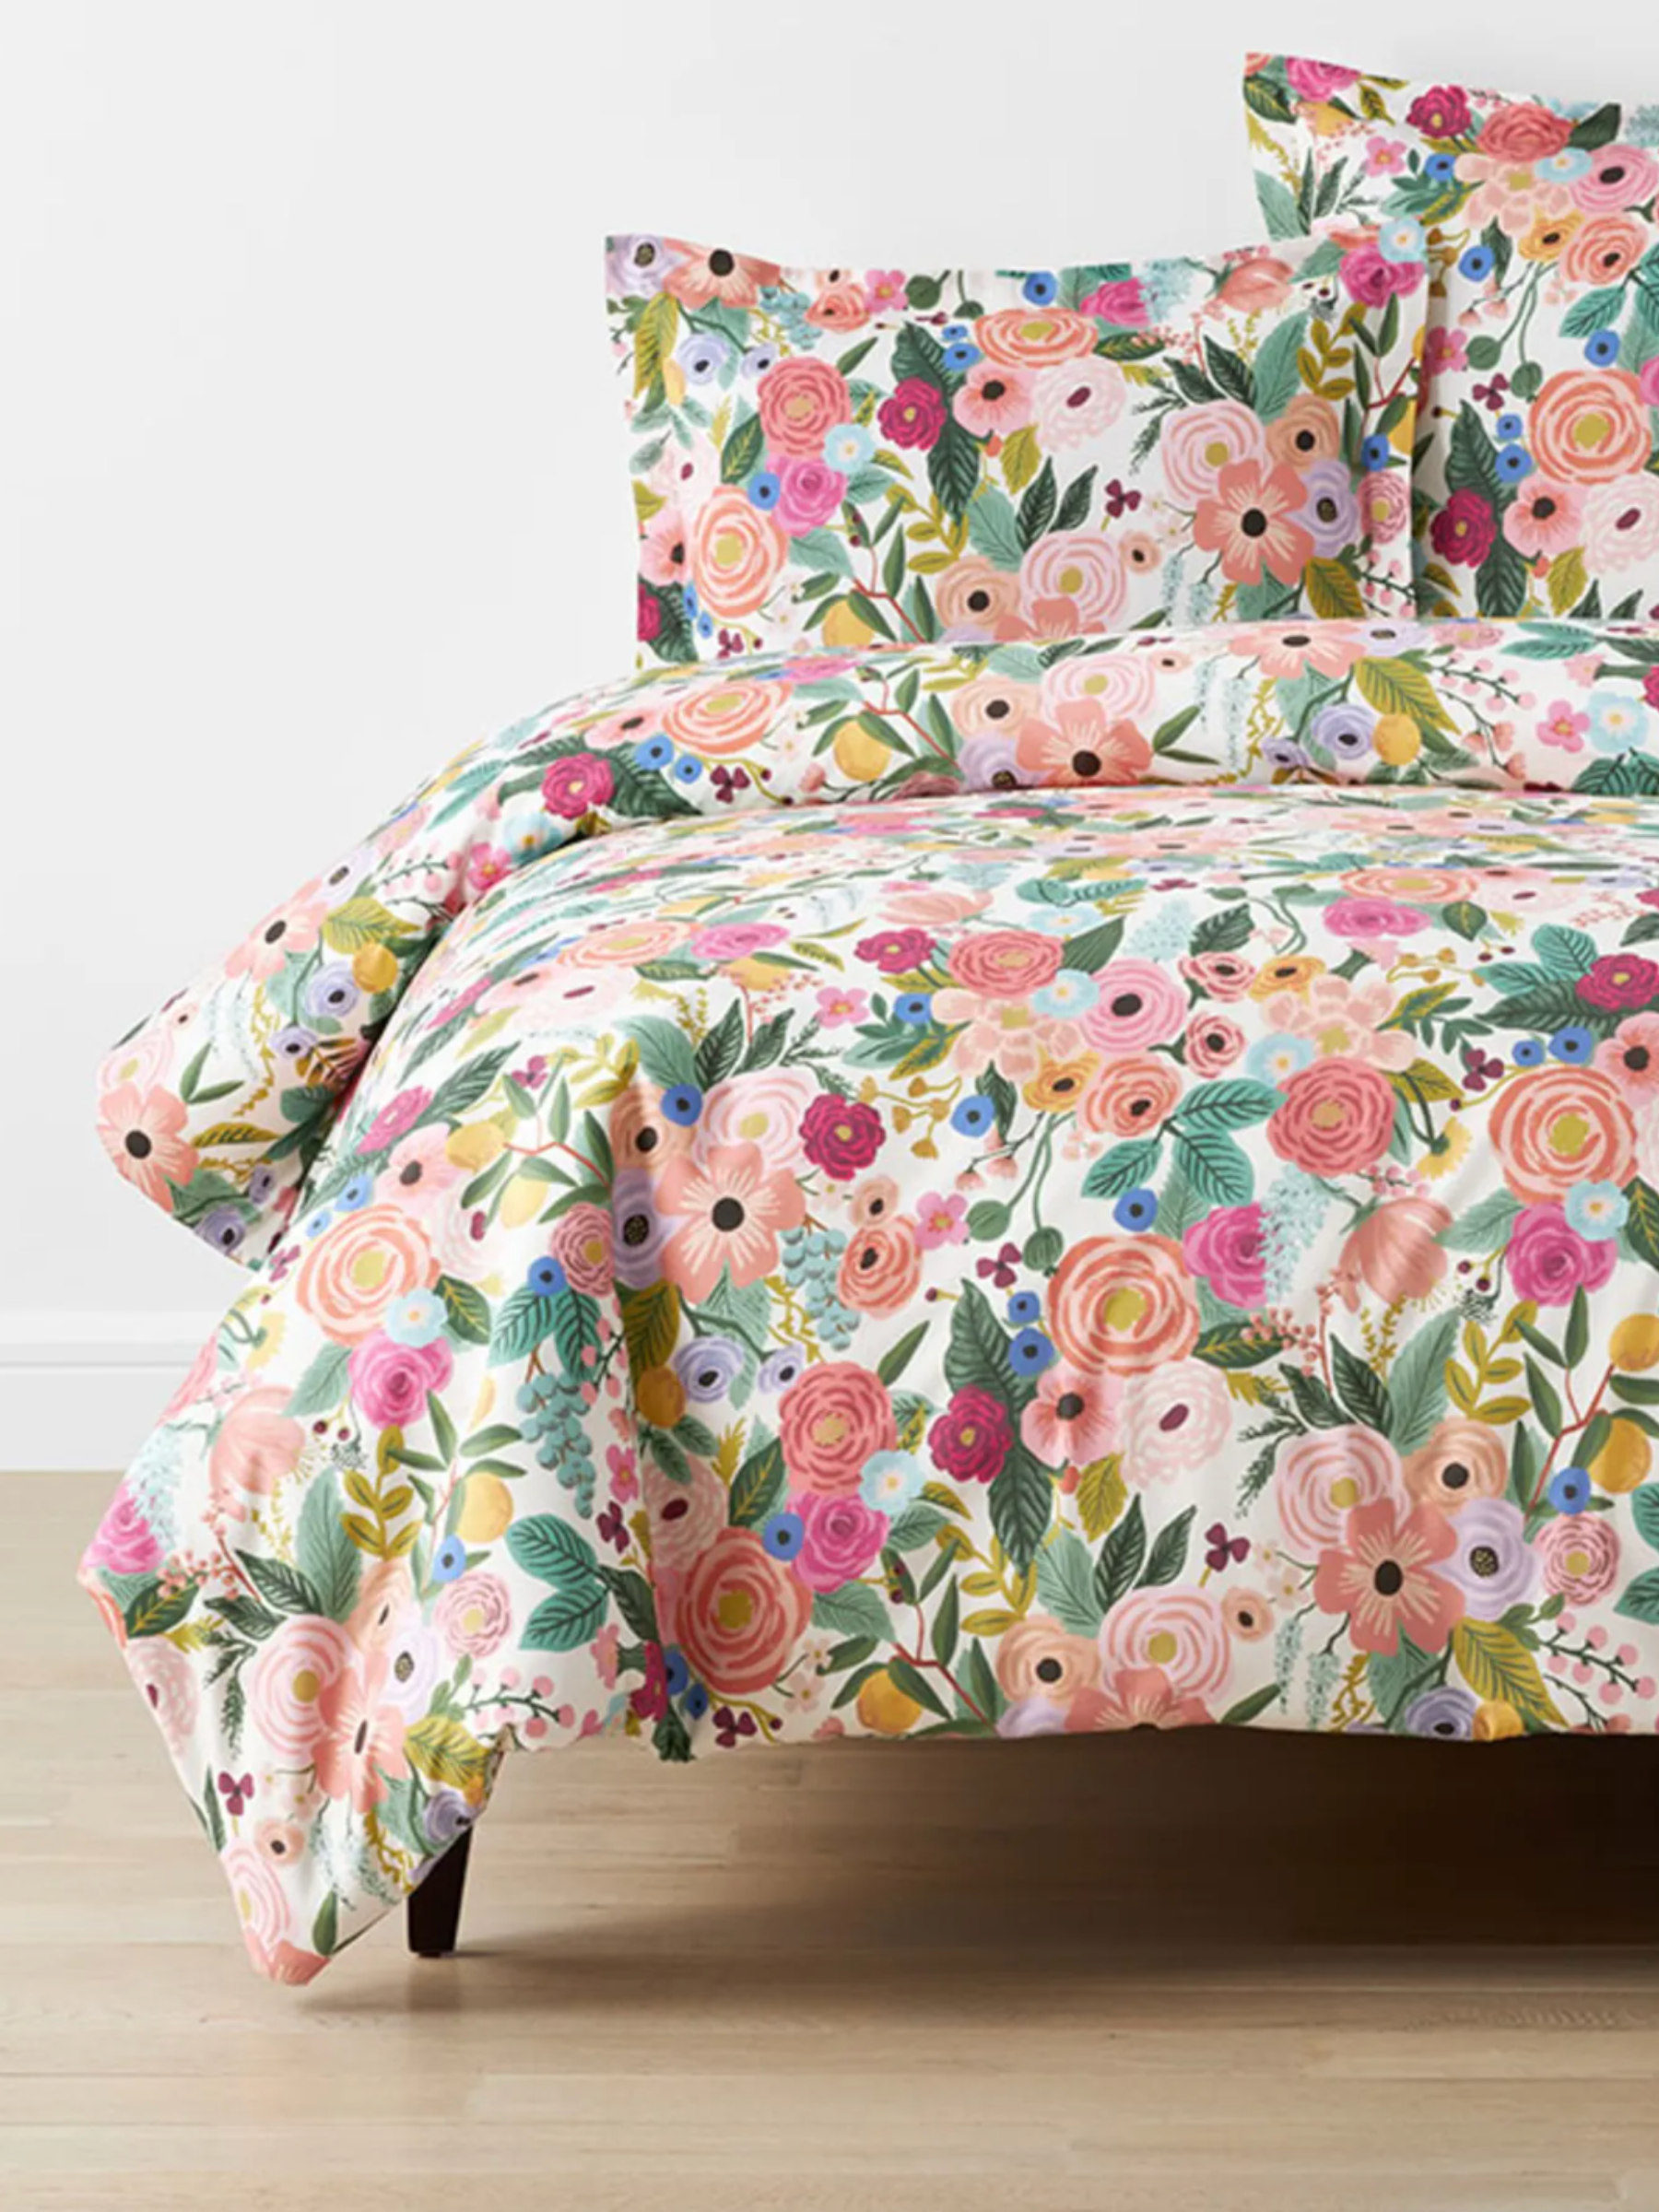 Stationery-inspired bedding? We might have to buy this for ourselves. The maximalist grad will love this blooming duvet cover that's so much chicer than whatever they slept on in their dorm. Don't forget the <a href="https://cna.st/affiliate-link/9wuTcQB4CMStr3sqUmcWmmwyVLBqVoj42oxx2yHFJLbXA5kMBncnqbaoTe6bLrkC44QMvE3nPQmc3AoKoVSw2F8R2u7FadBuzjNnreEQVyJAS6bojRFLQ1Hmm2hFwyok3rbSki46VfAoEVNTCR3bm1Kv4KAJWCS8VezkXojsragysU4KWAjExdyUgT5qvd1nArszj8cGWiFLsZbeC" rel="sponsored">matching sheets set</a> too. $109, The Company Store. <a href="https://www.thecompanystore.com/rifle-paper-garden-party-percale-duvet-cover/51191D.html">Get it now!</a><p>Sign up for today’s biggest stories, from pop culture to politics.</p><a href="https://www.glamour.com/newsletter/news?sourceCode=msnsend">Sign Up</a>